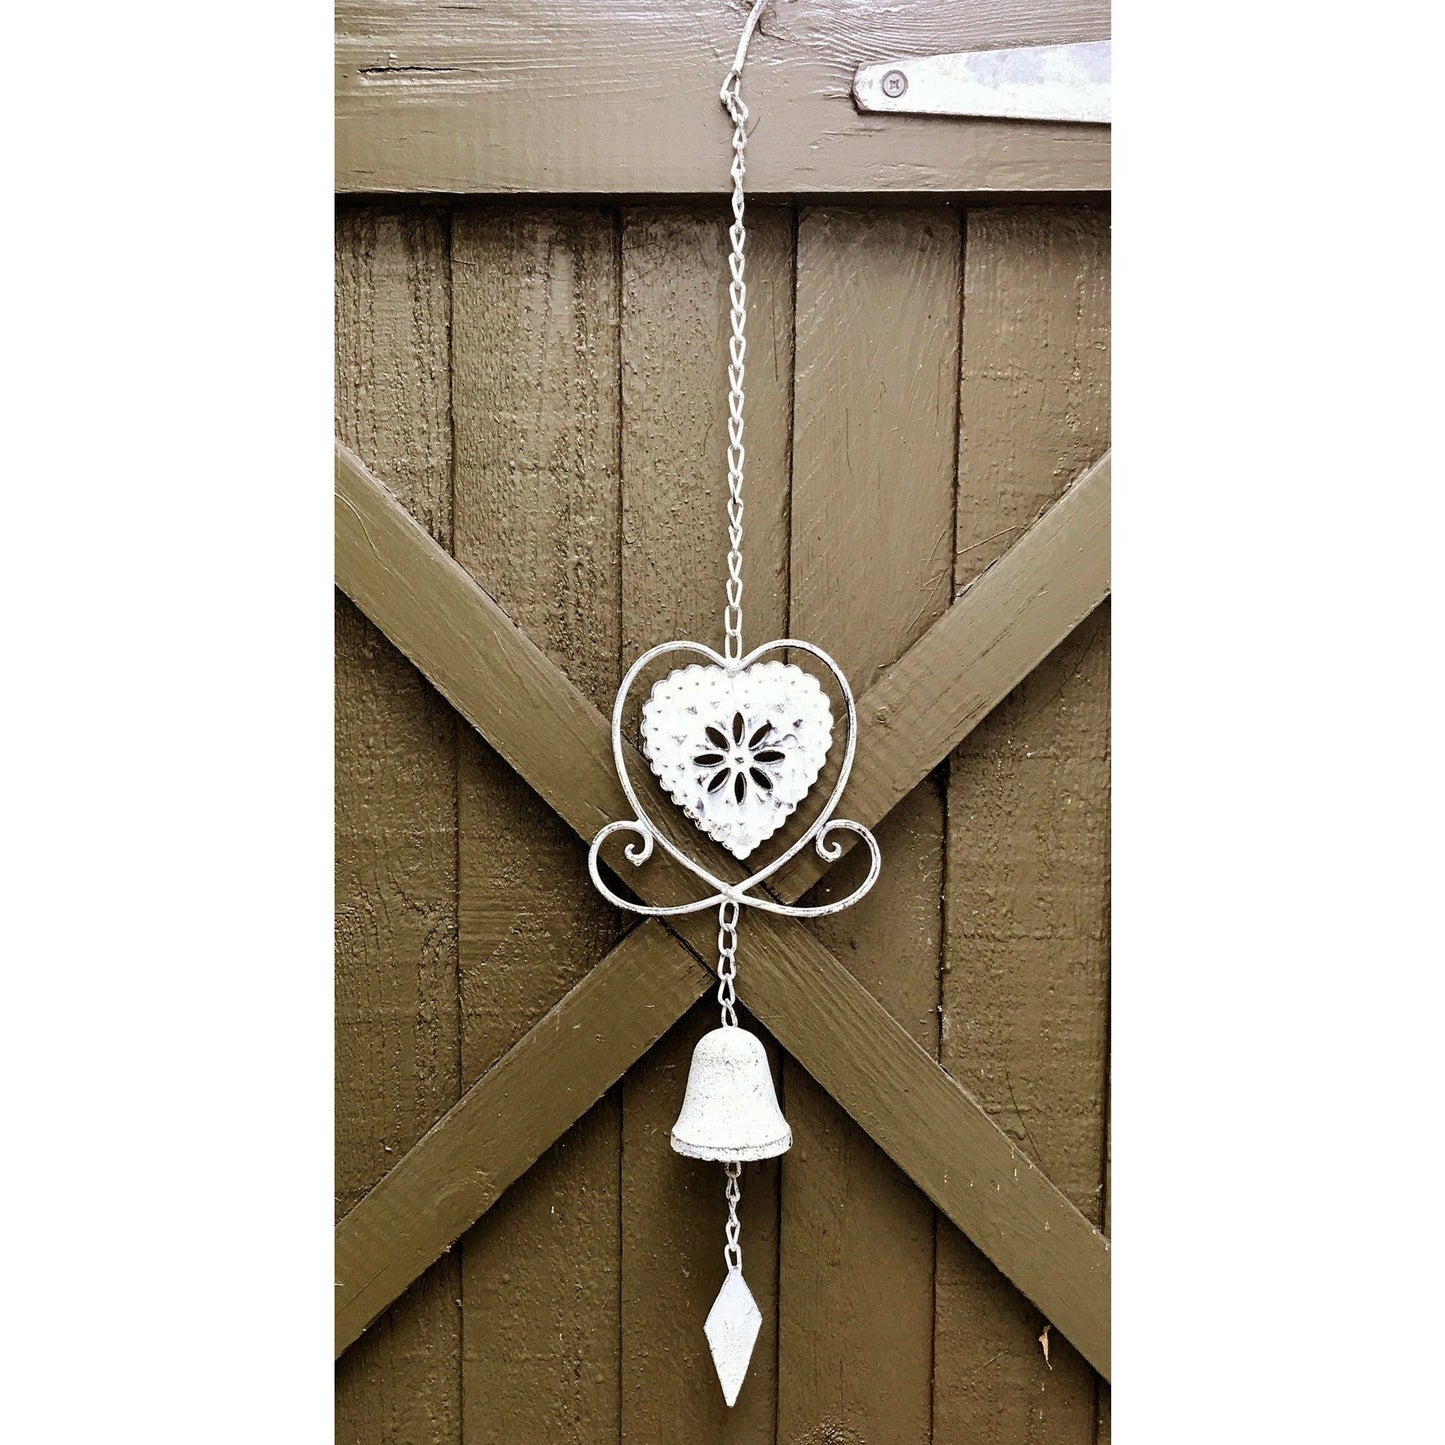 Cream Heart Hanging Decorative Bell - Ashton and Finch